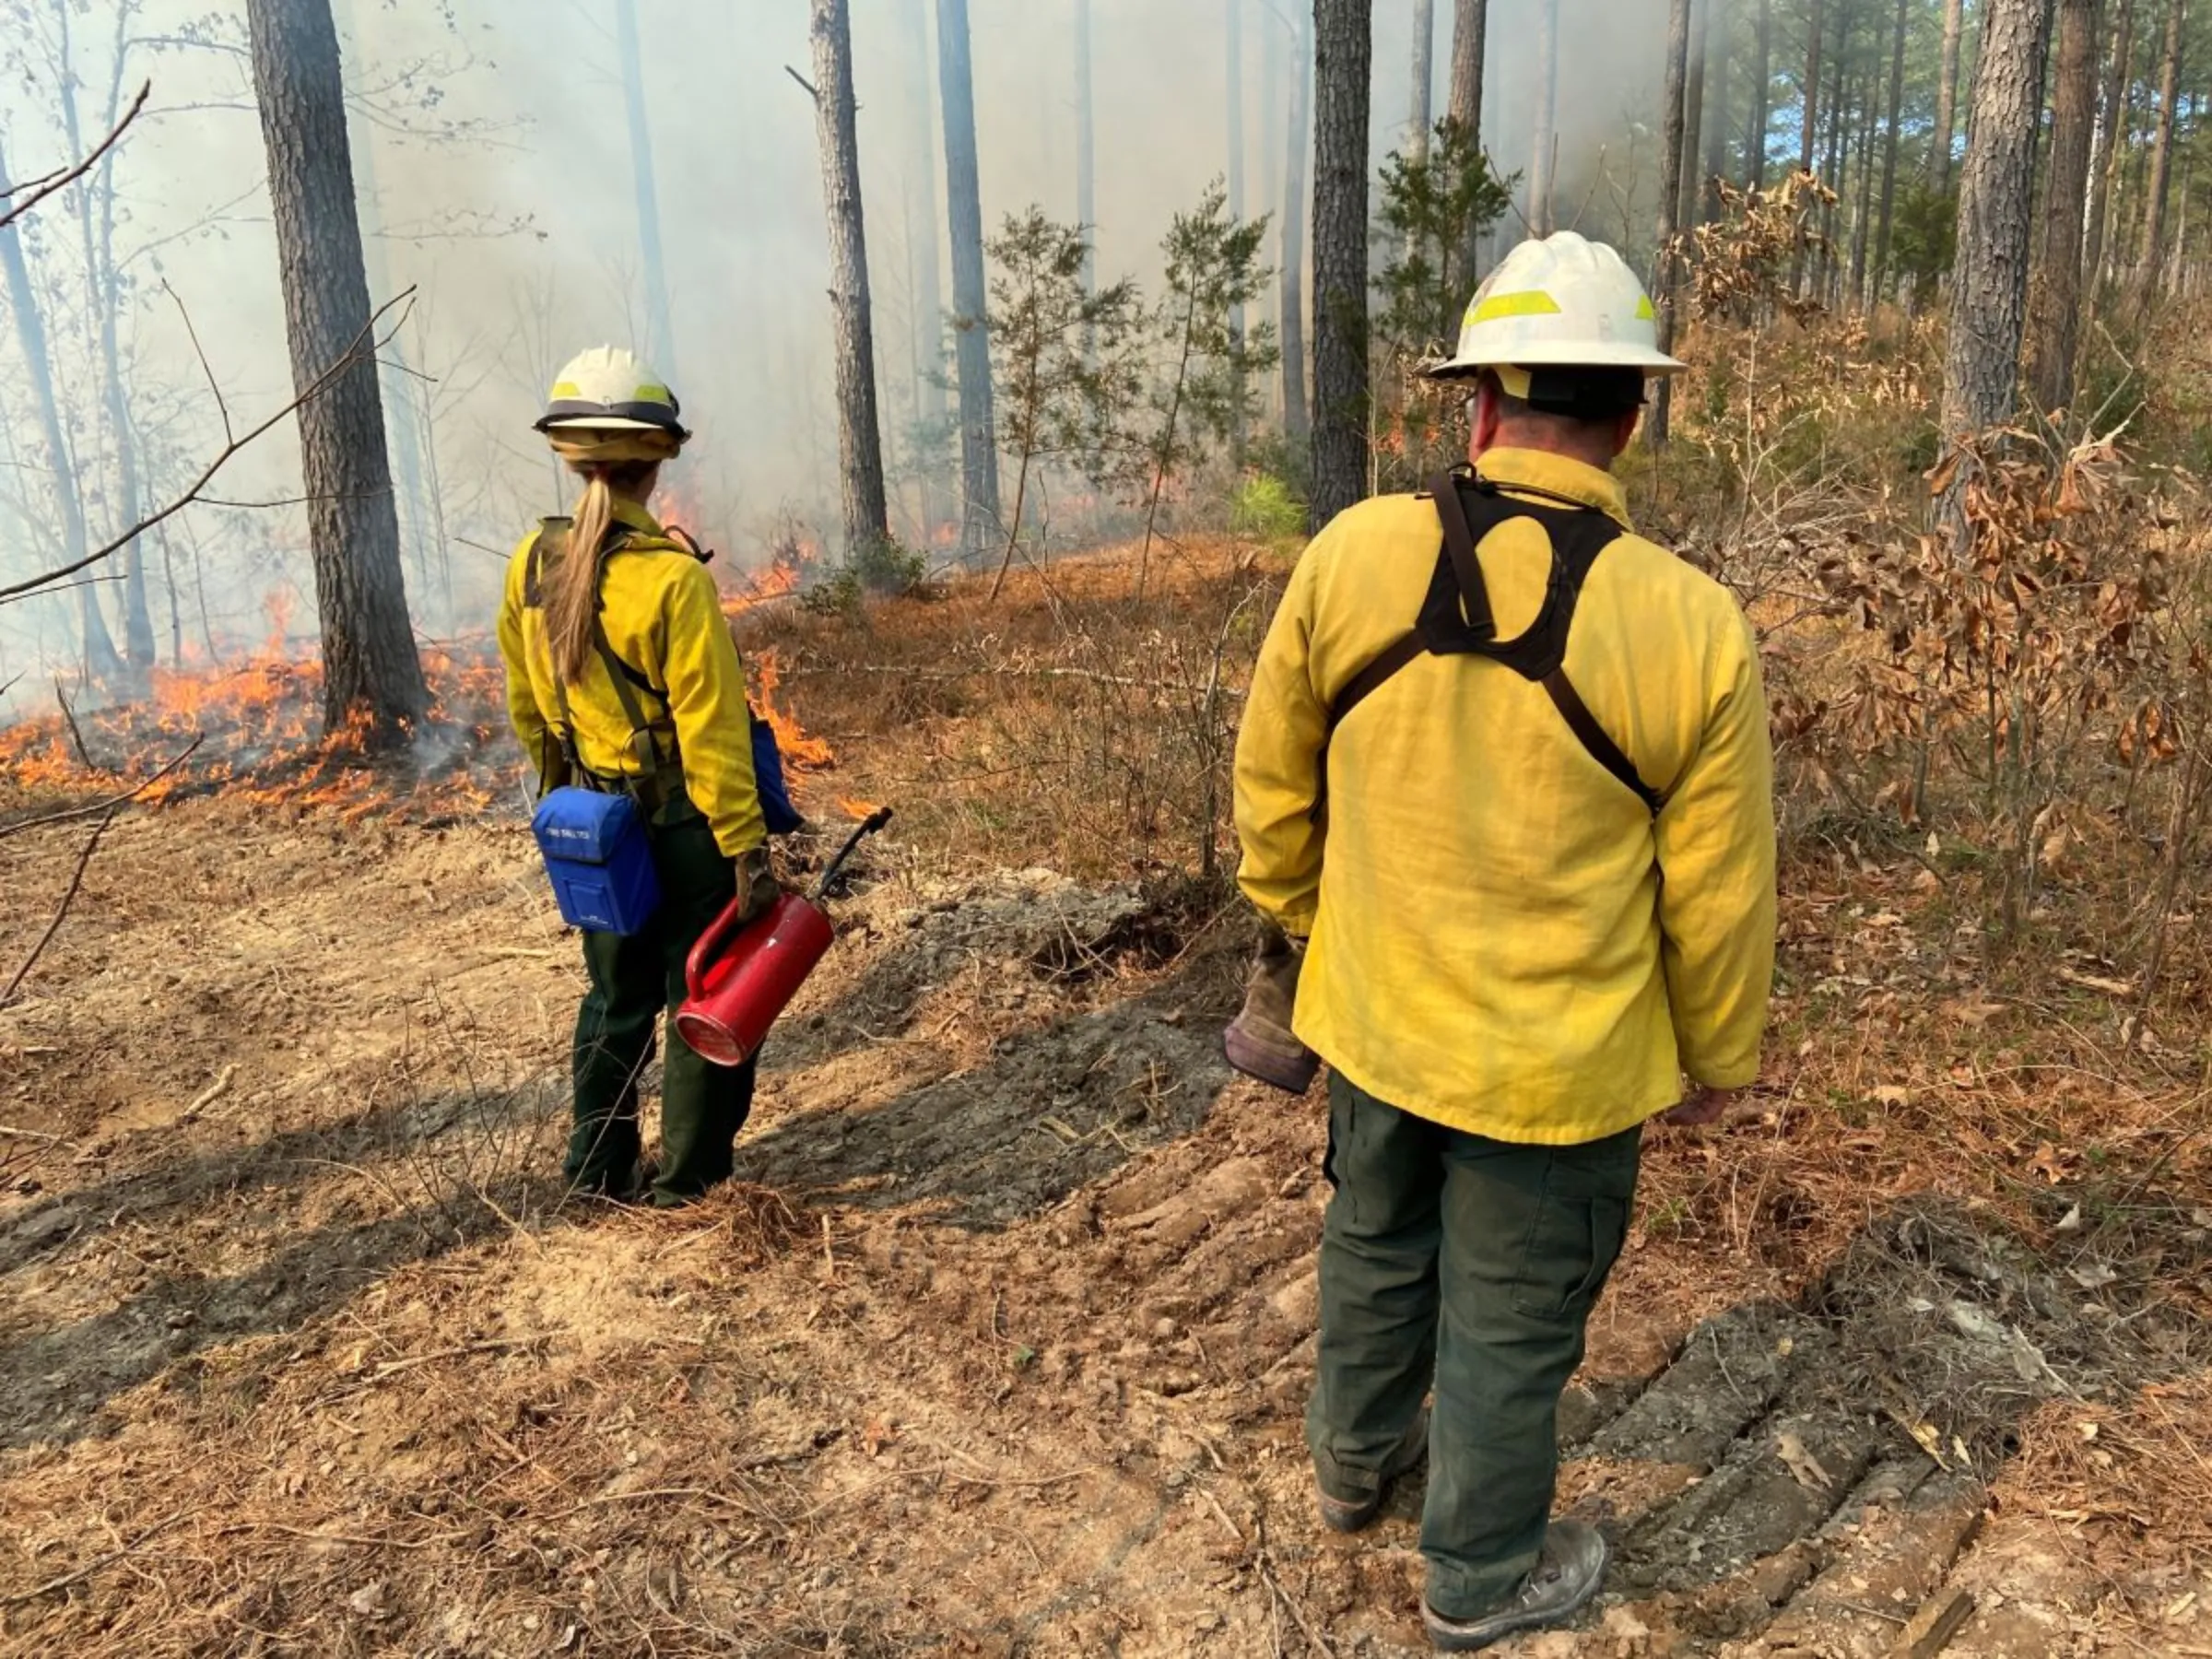 Members of a Virginia Department of Forestry team survey part of a controlled burn they conducted in King William County, Virginia, USA, March 9, 2023. Thomson Reuters Foundation/David Sherfinski.